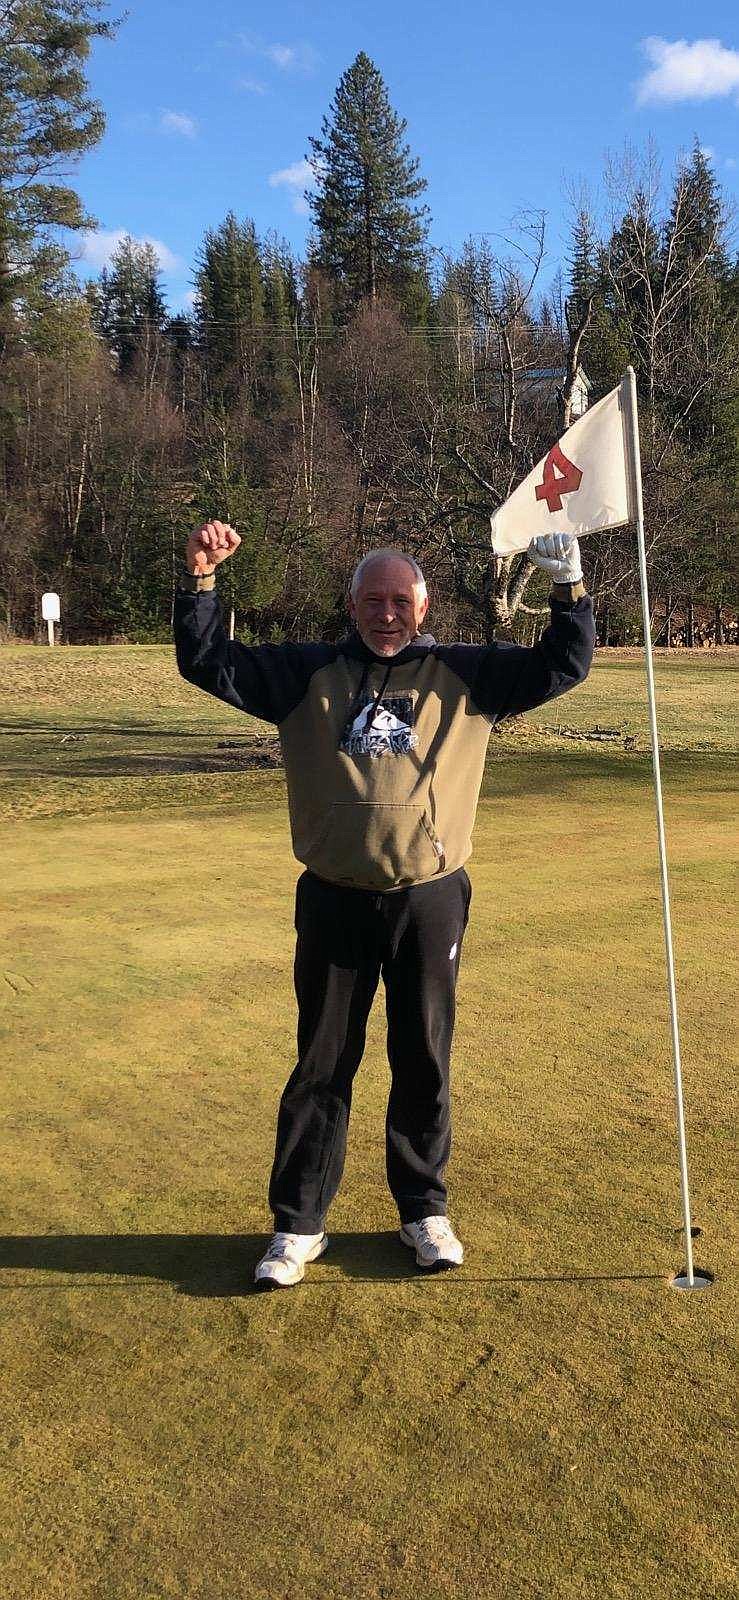 Congrats are in order for Curt Zeller who dropped in a hole-in-one on the No. 4 hole at Pinehurst Golf Course last week. His buddies Doug Apperson and Blake Evenson were on hand to witness the once in a lifetime feat and wanted to give him a shoutout.